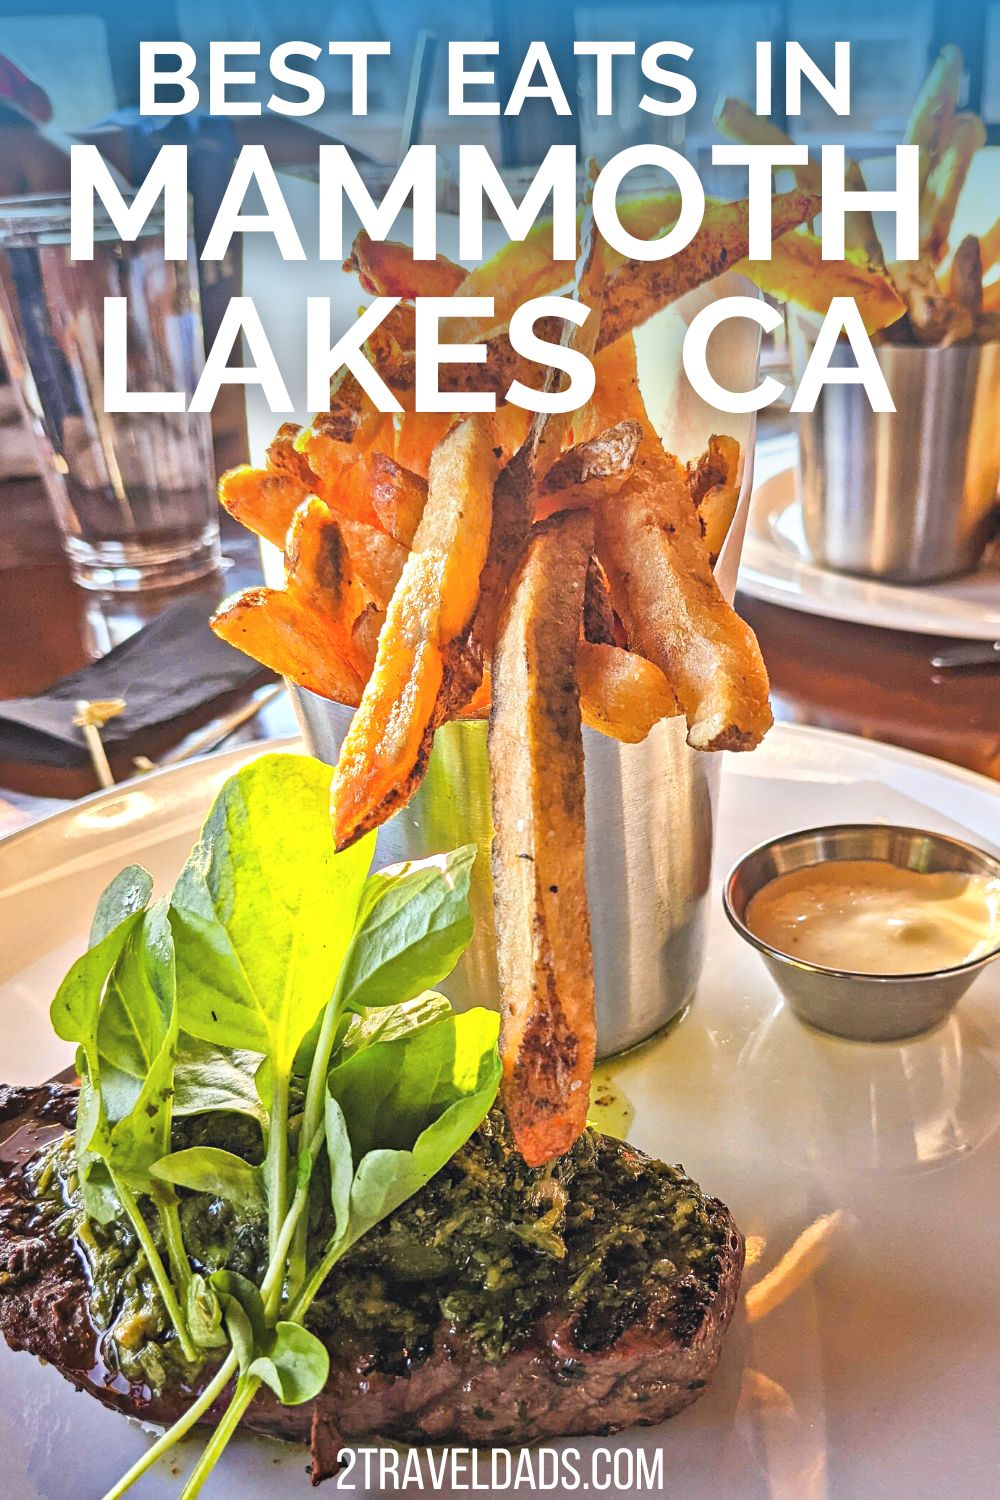 There are lots of great places to eat in Mammoth Lakes, California. See top picks for unique, healthy spots for breakfast, lunch and dinner before skiing or after hiking. So many choices, but these are guaranteed good.